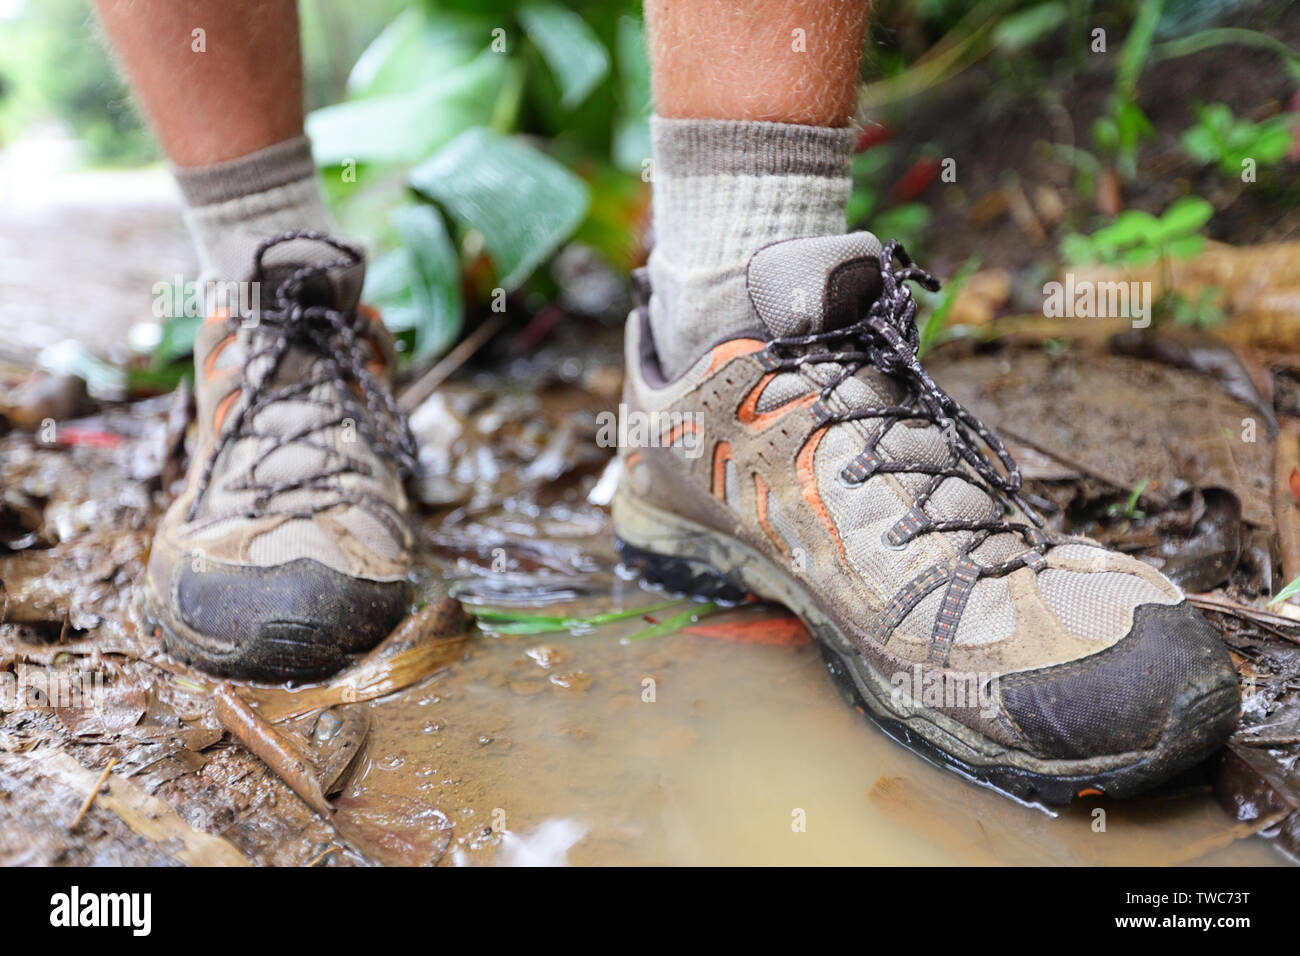 Pair Of Shoes In Mud High Resolution Stock Photography and Images - Alamy